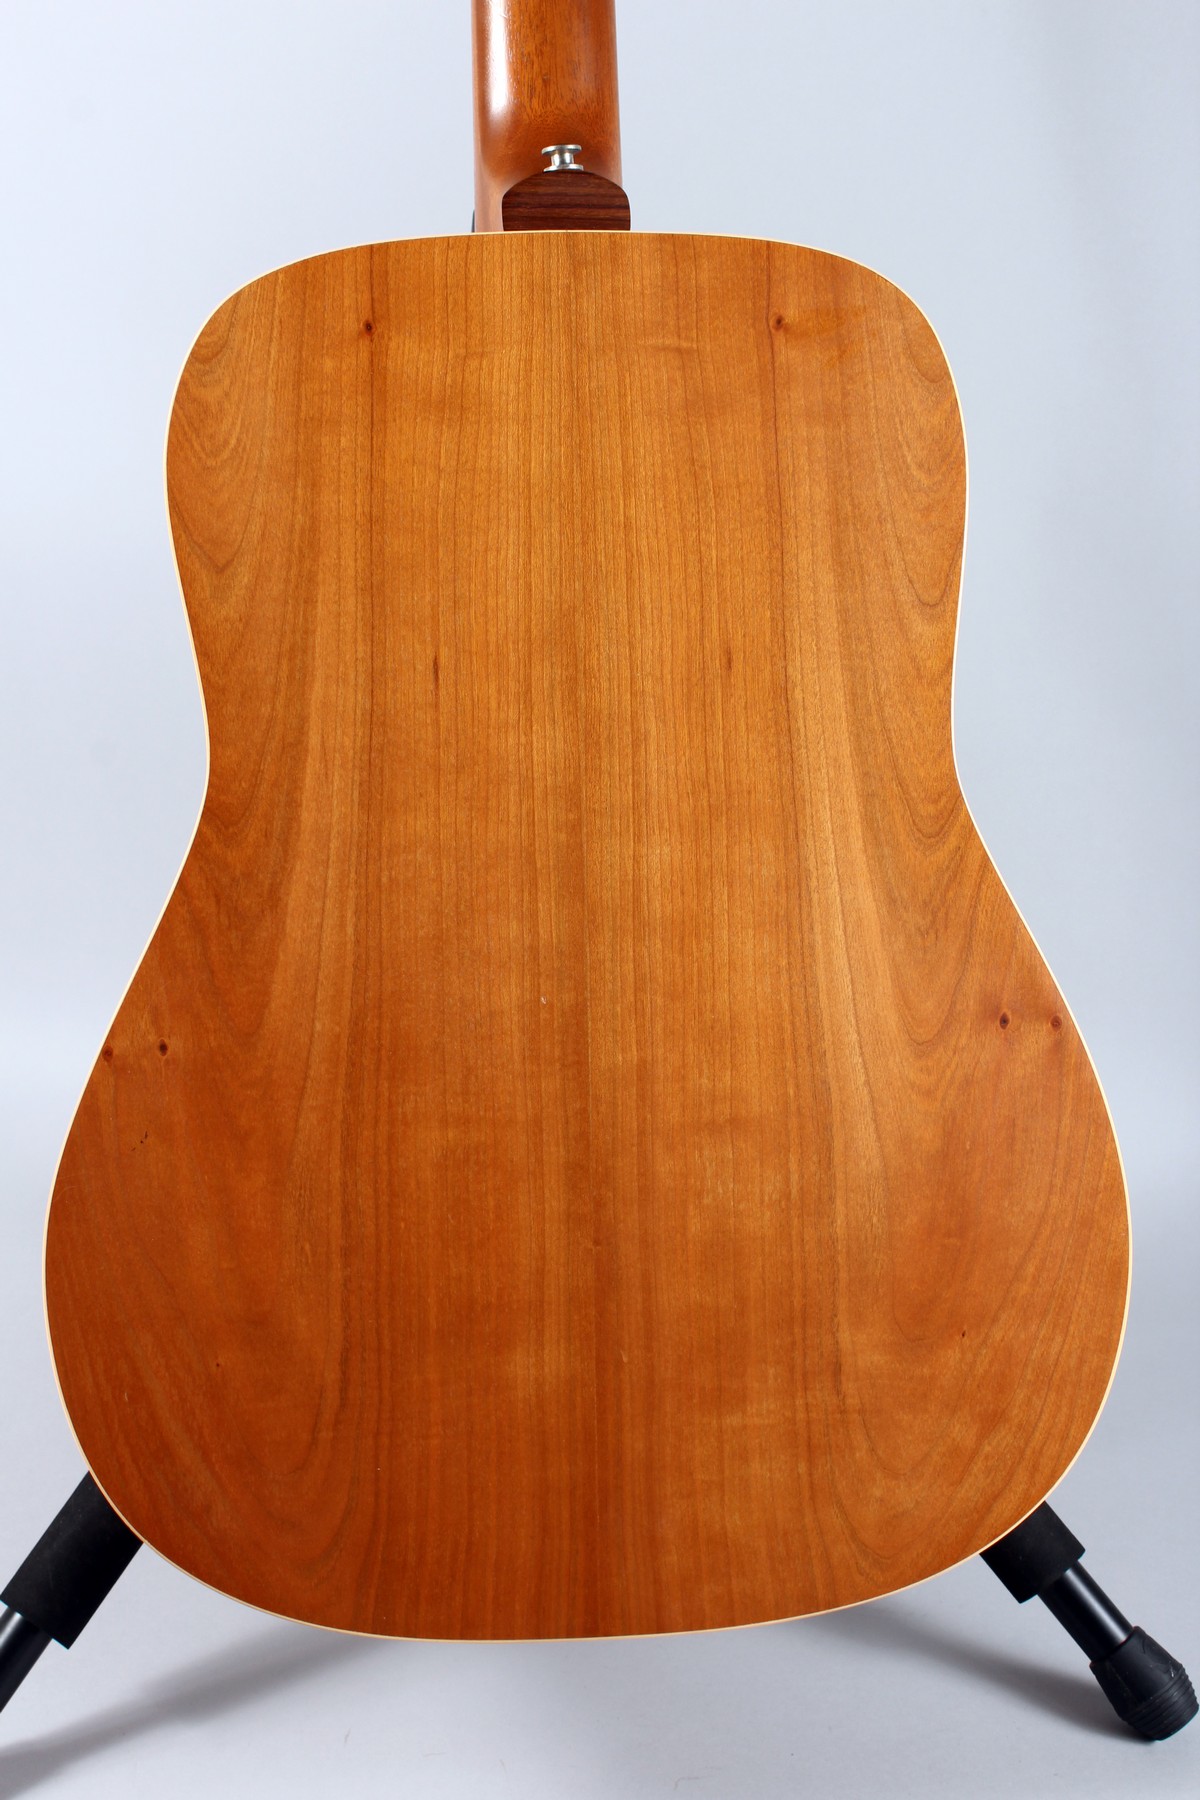 NORMAN B20 - a 12-string acoustic dreadnought guitar handmade in Quebec, Canada. Cherry back and - Image 14 of 27